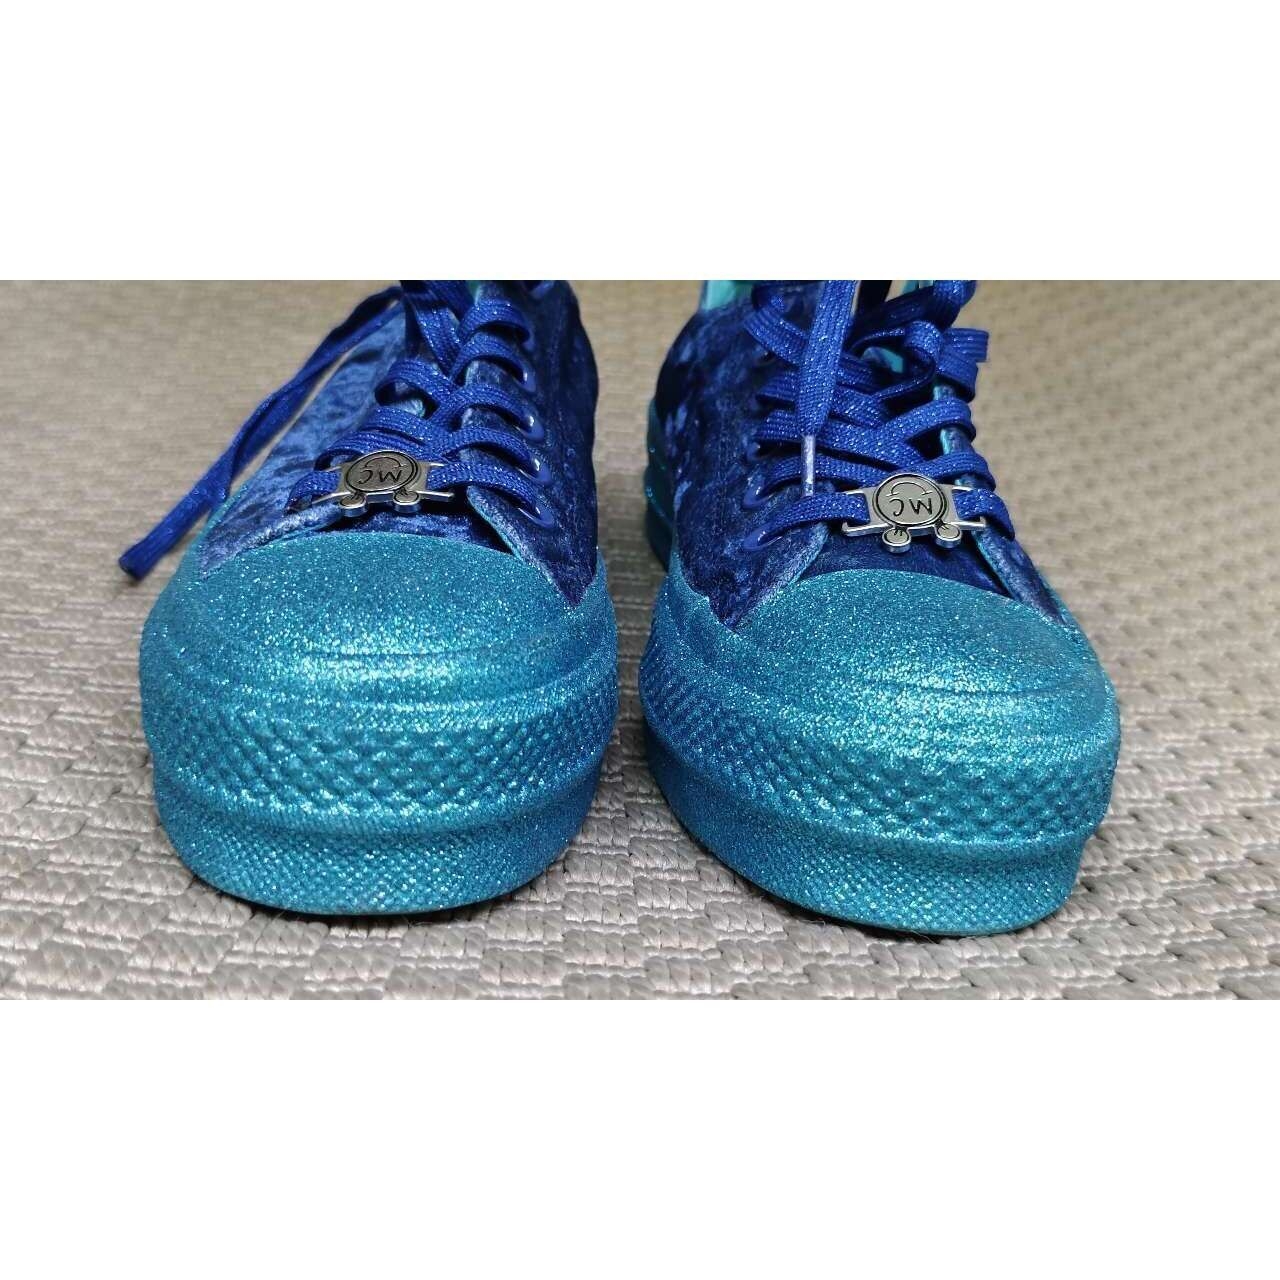 Converse Miley Cyrus x Chuck Taylor AS Lift Low Blue Metallic Sneakers